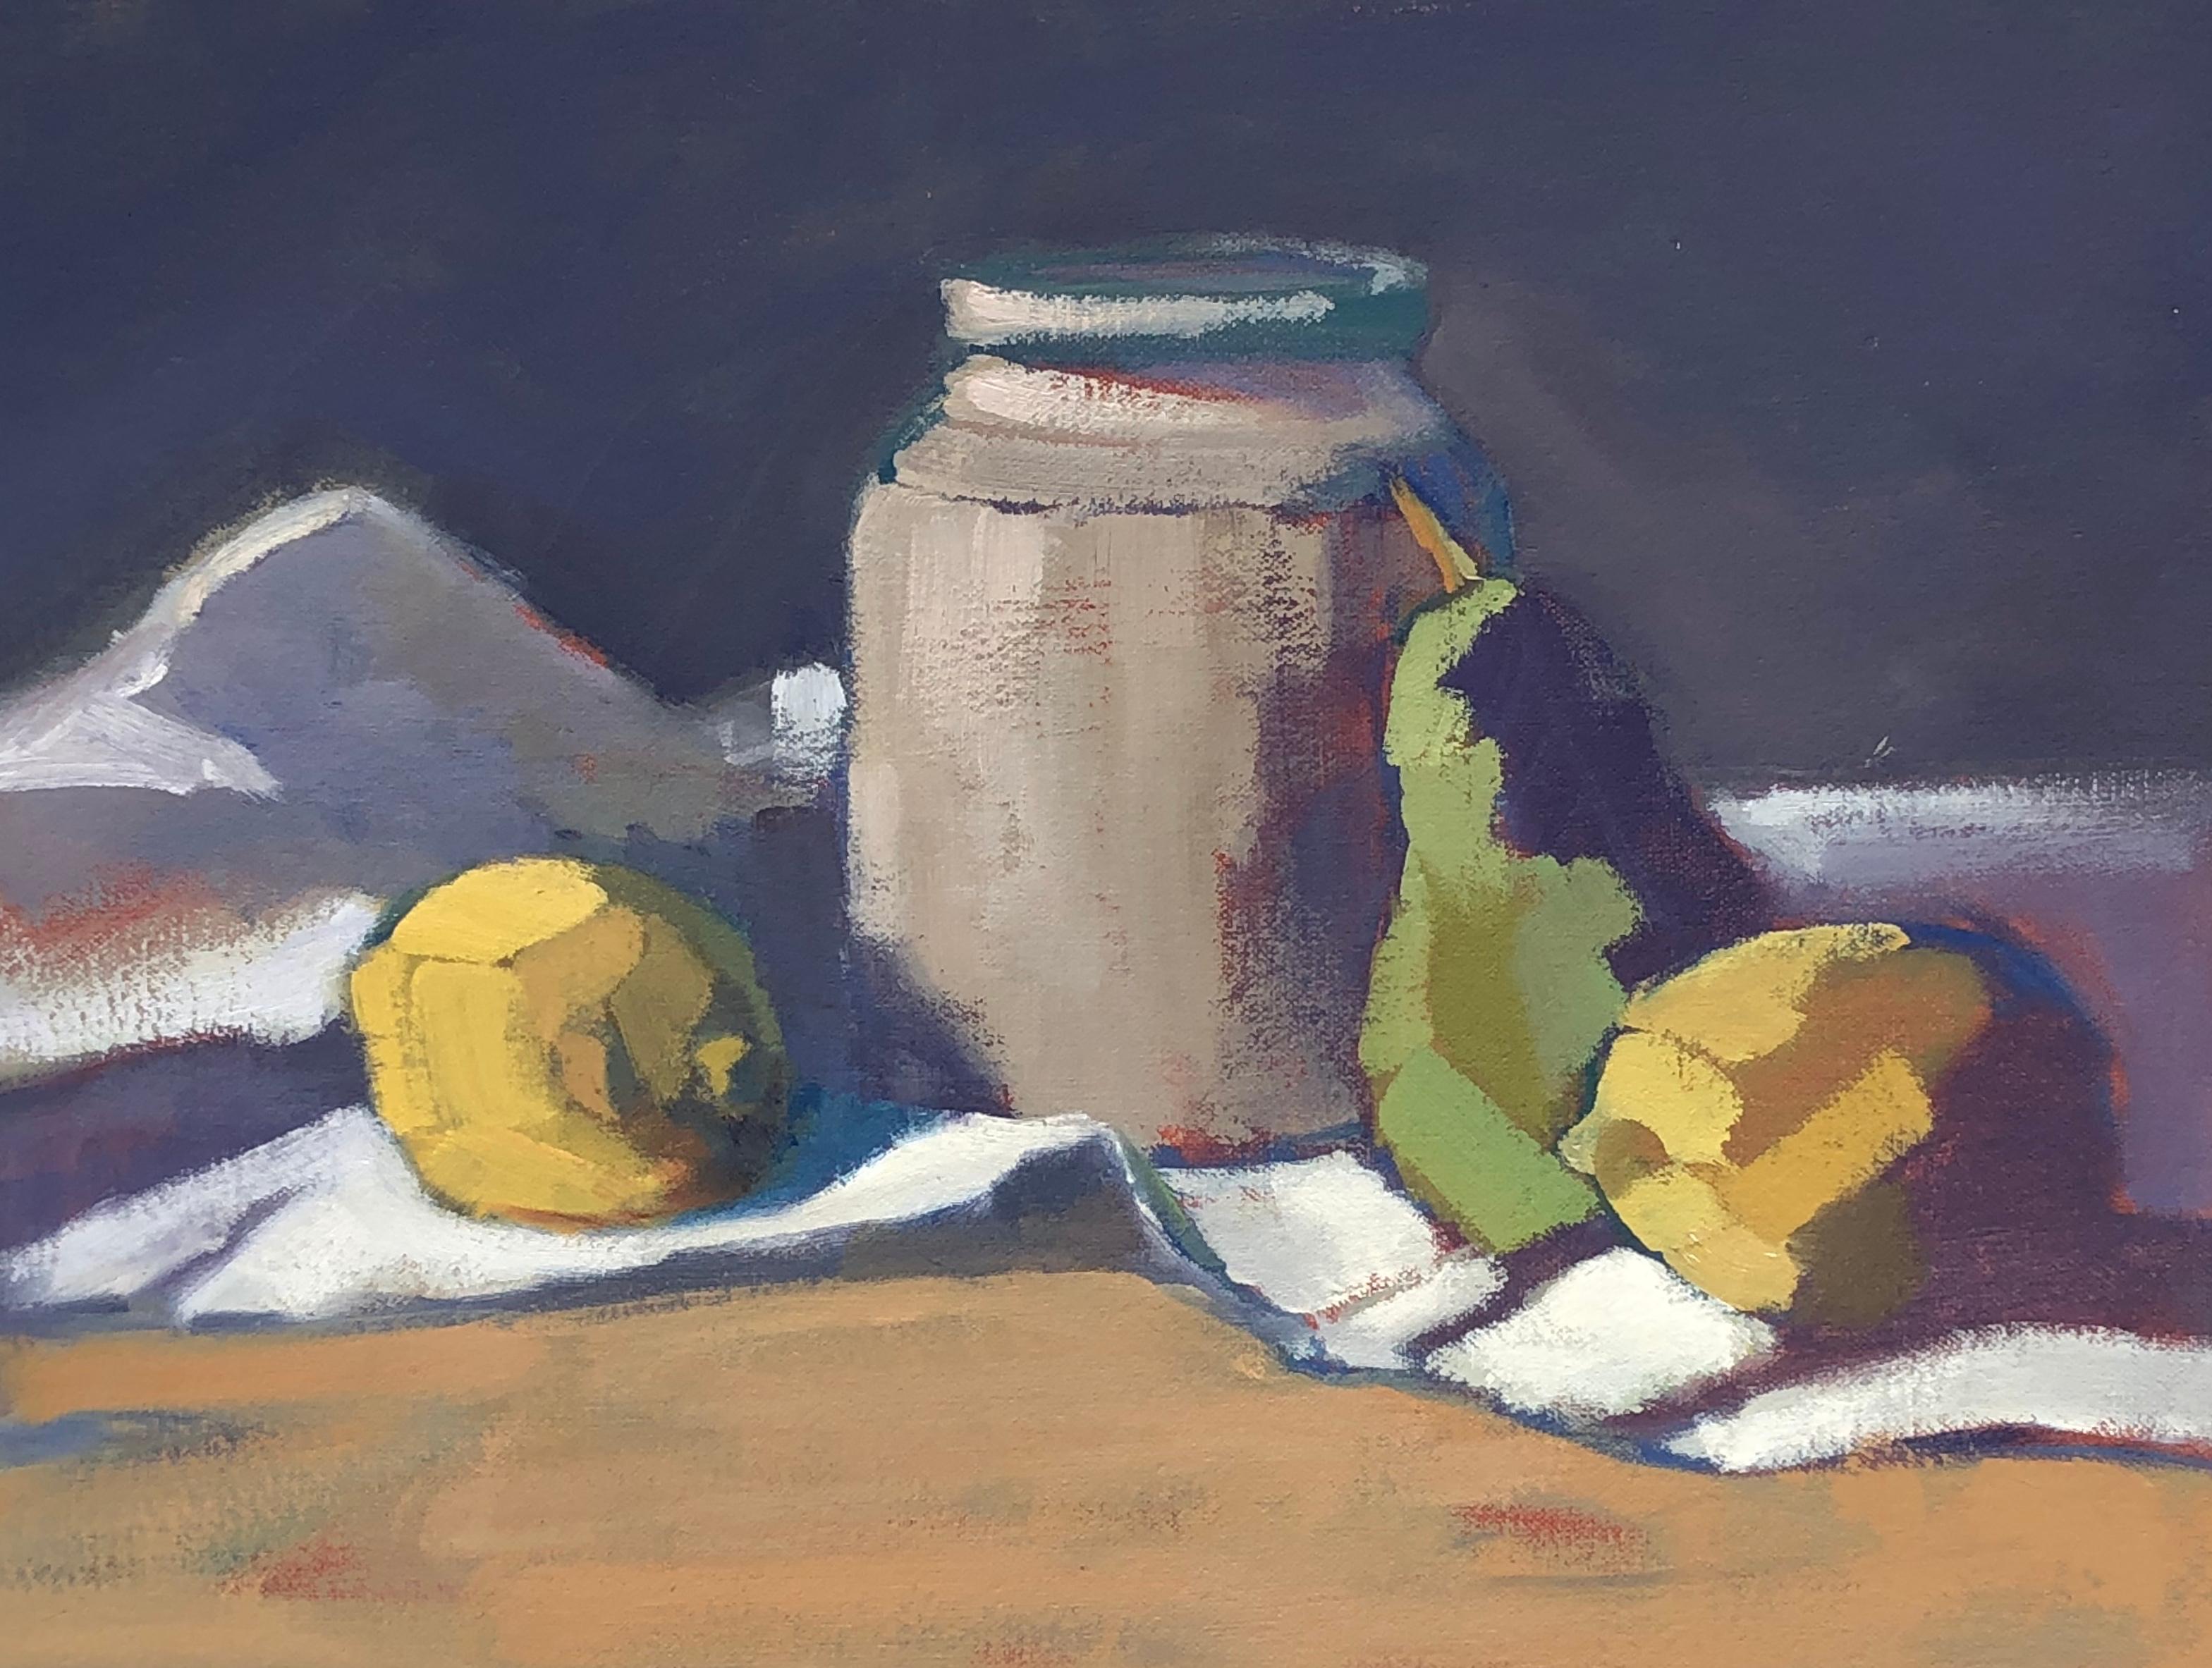 Jugs, Lemons, Pear Without its frame, the painting measures 12 x 16 inches. 

Lesley Powell paints in oils with a classical approach to composition and color, but she has a point of view that is fresh and contemporary. Whenever possible, she prefers